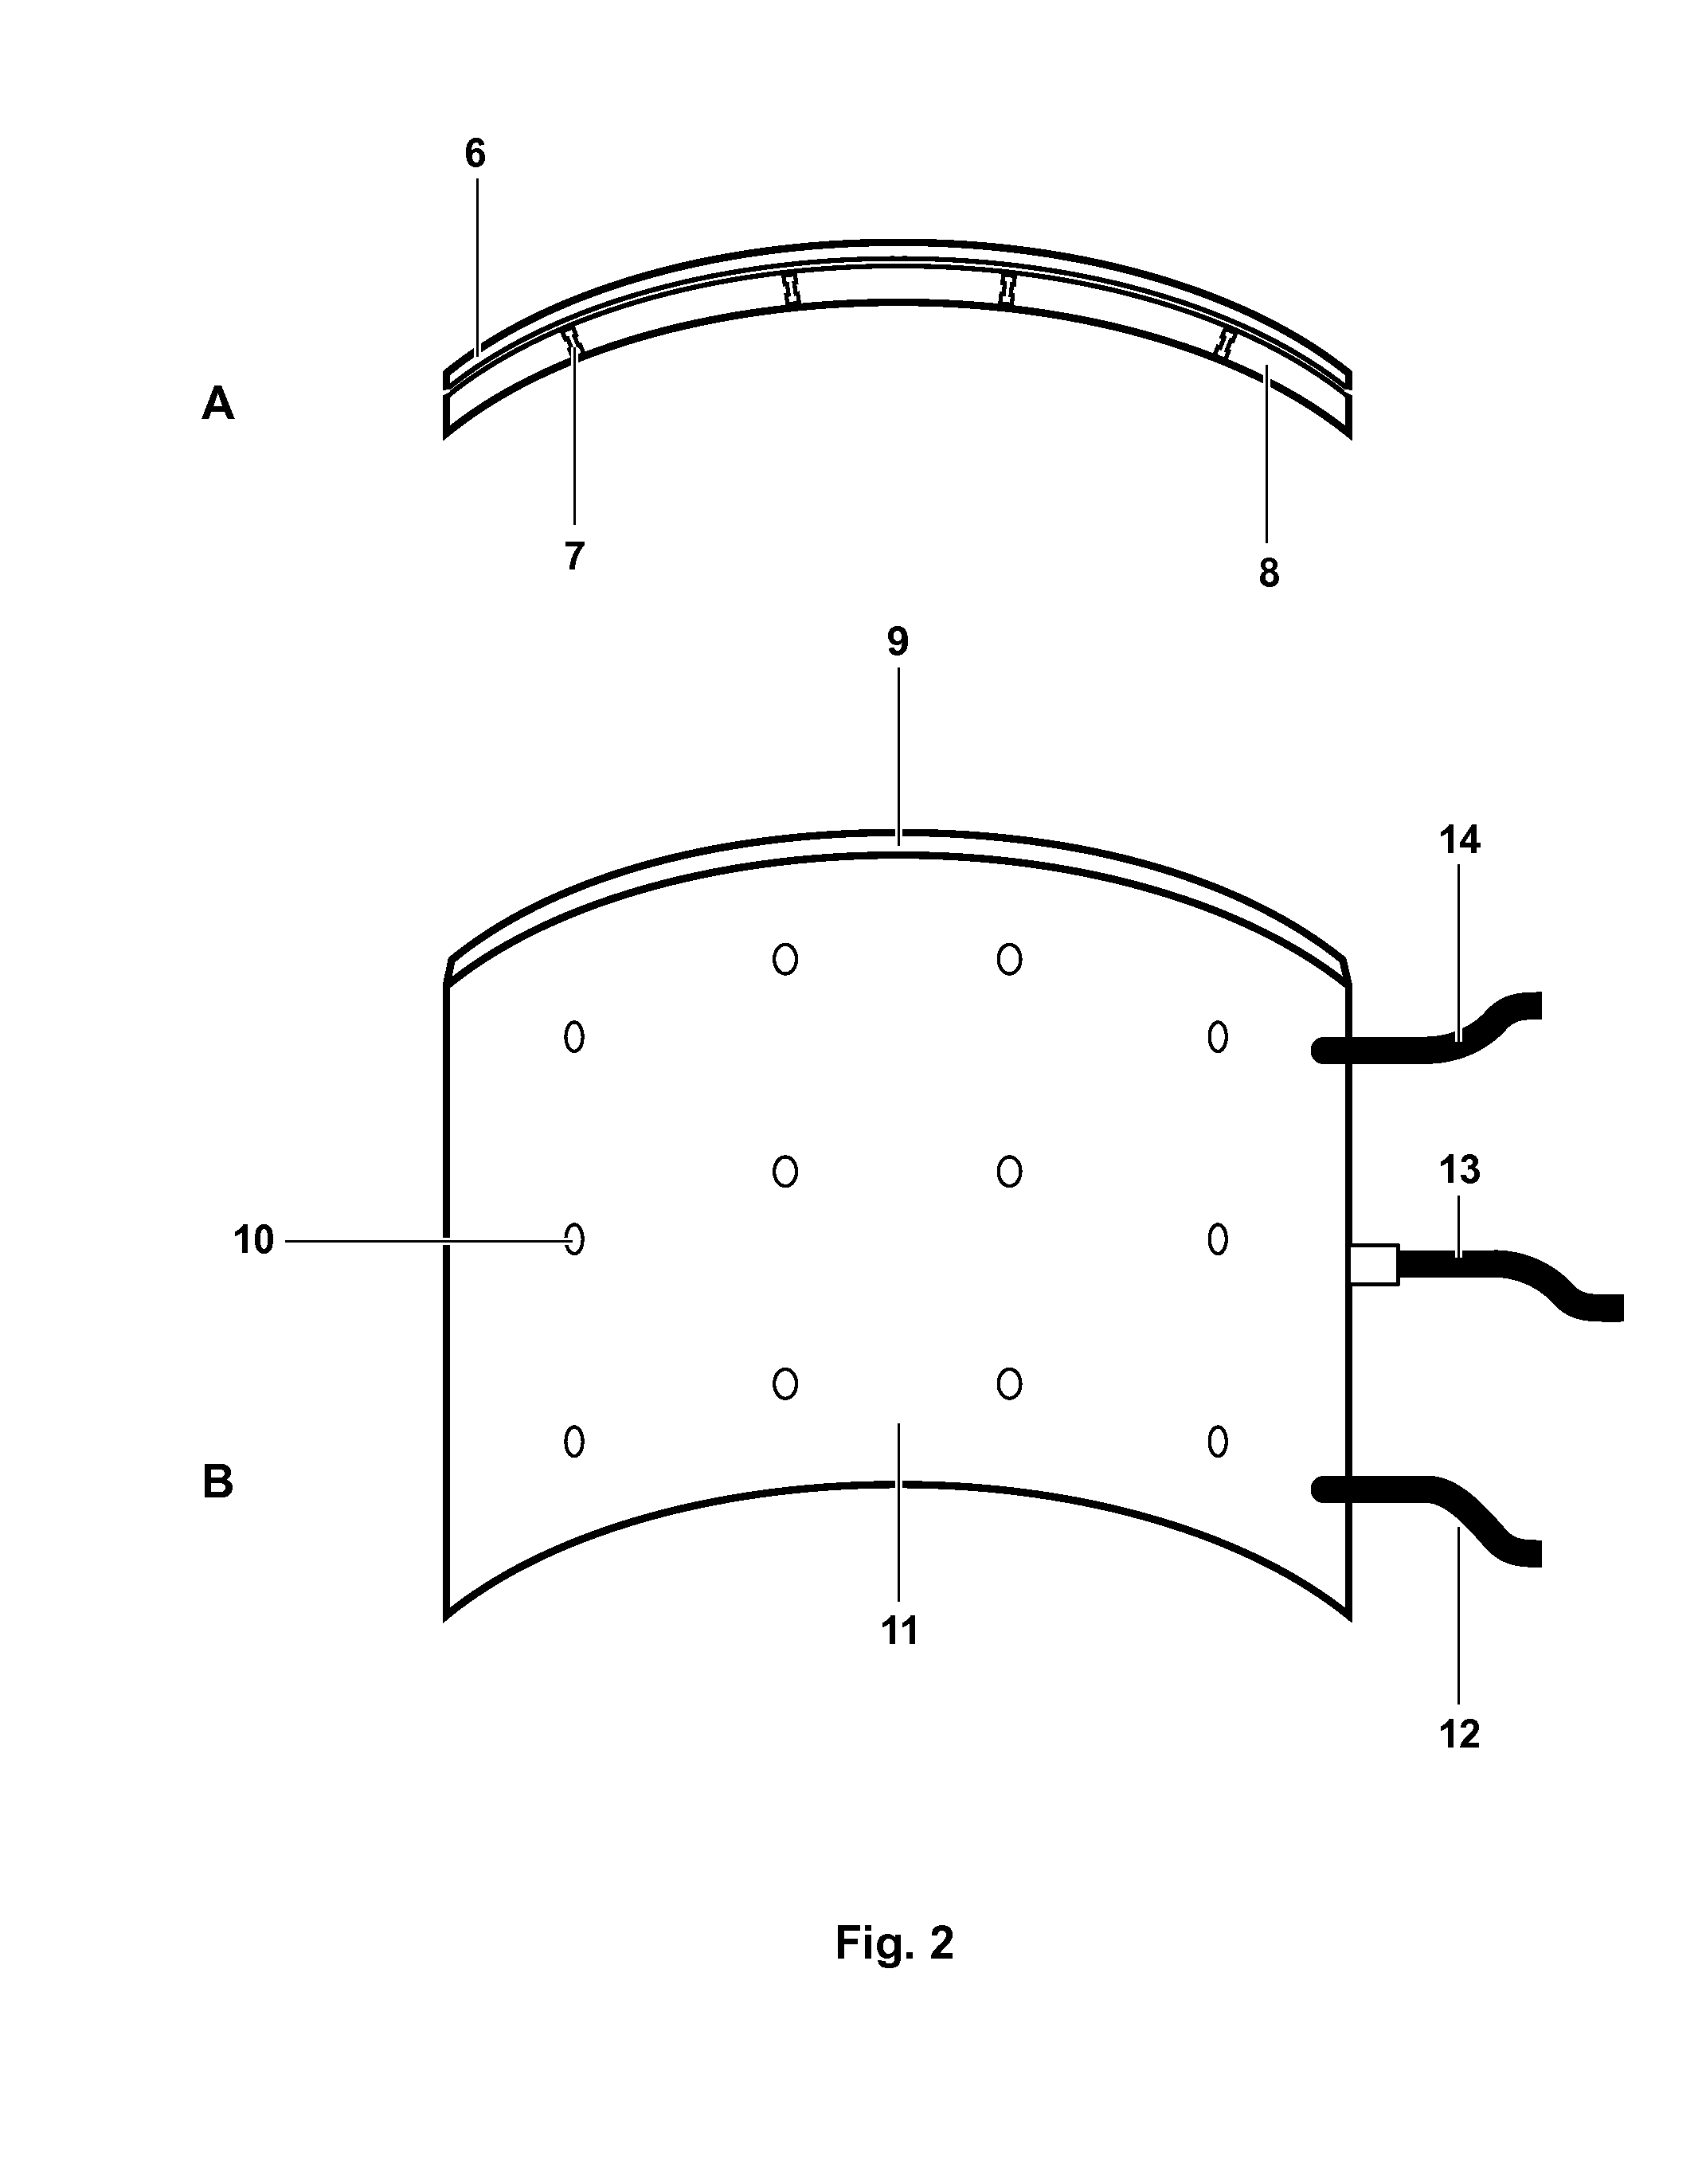 Microwave devices for treating biological samples and tissue and methods for using the same